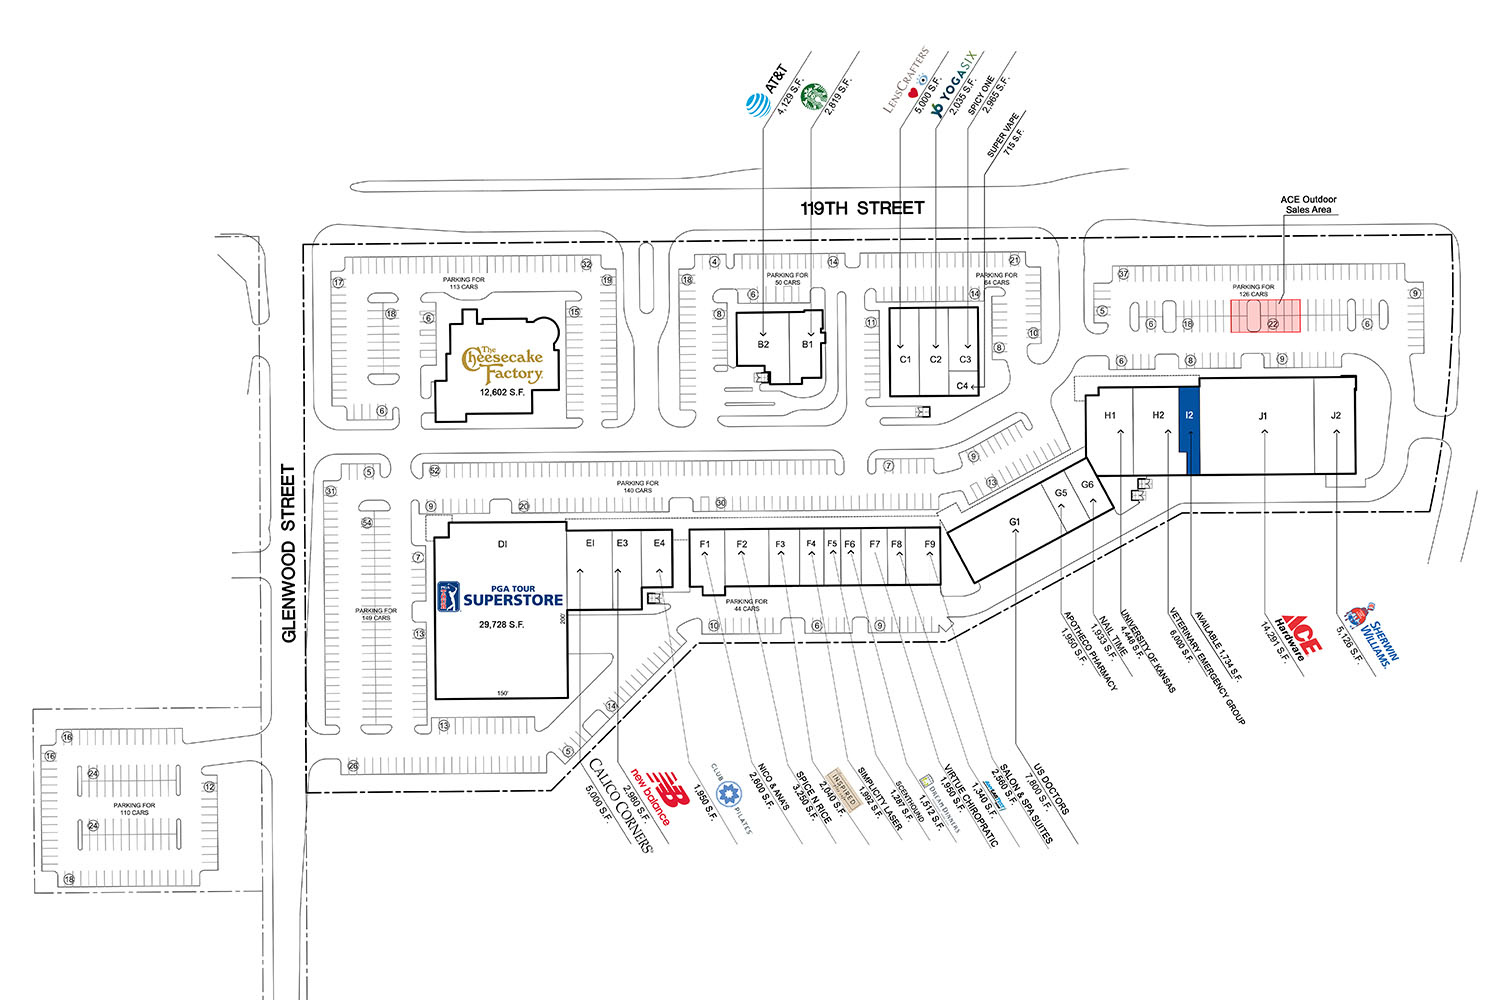 The Fountains Site Plan